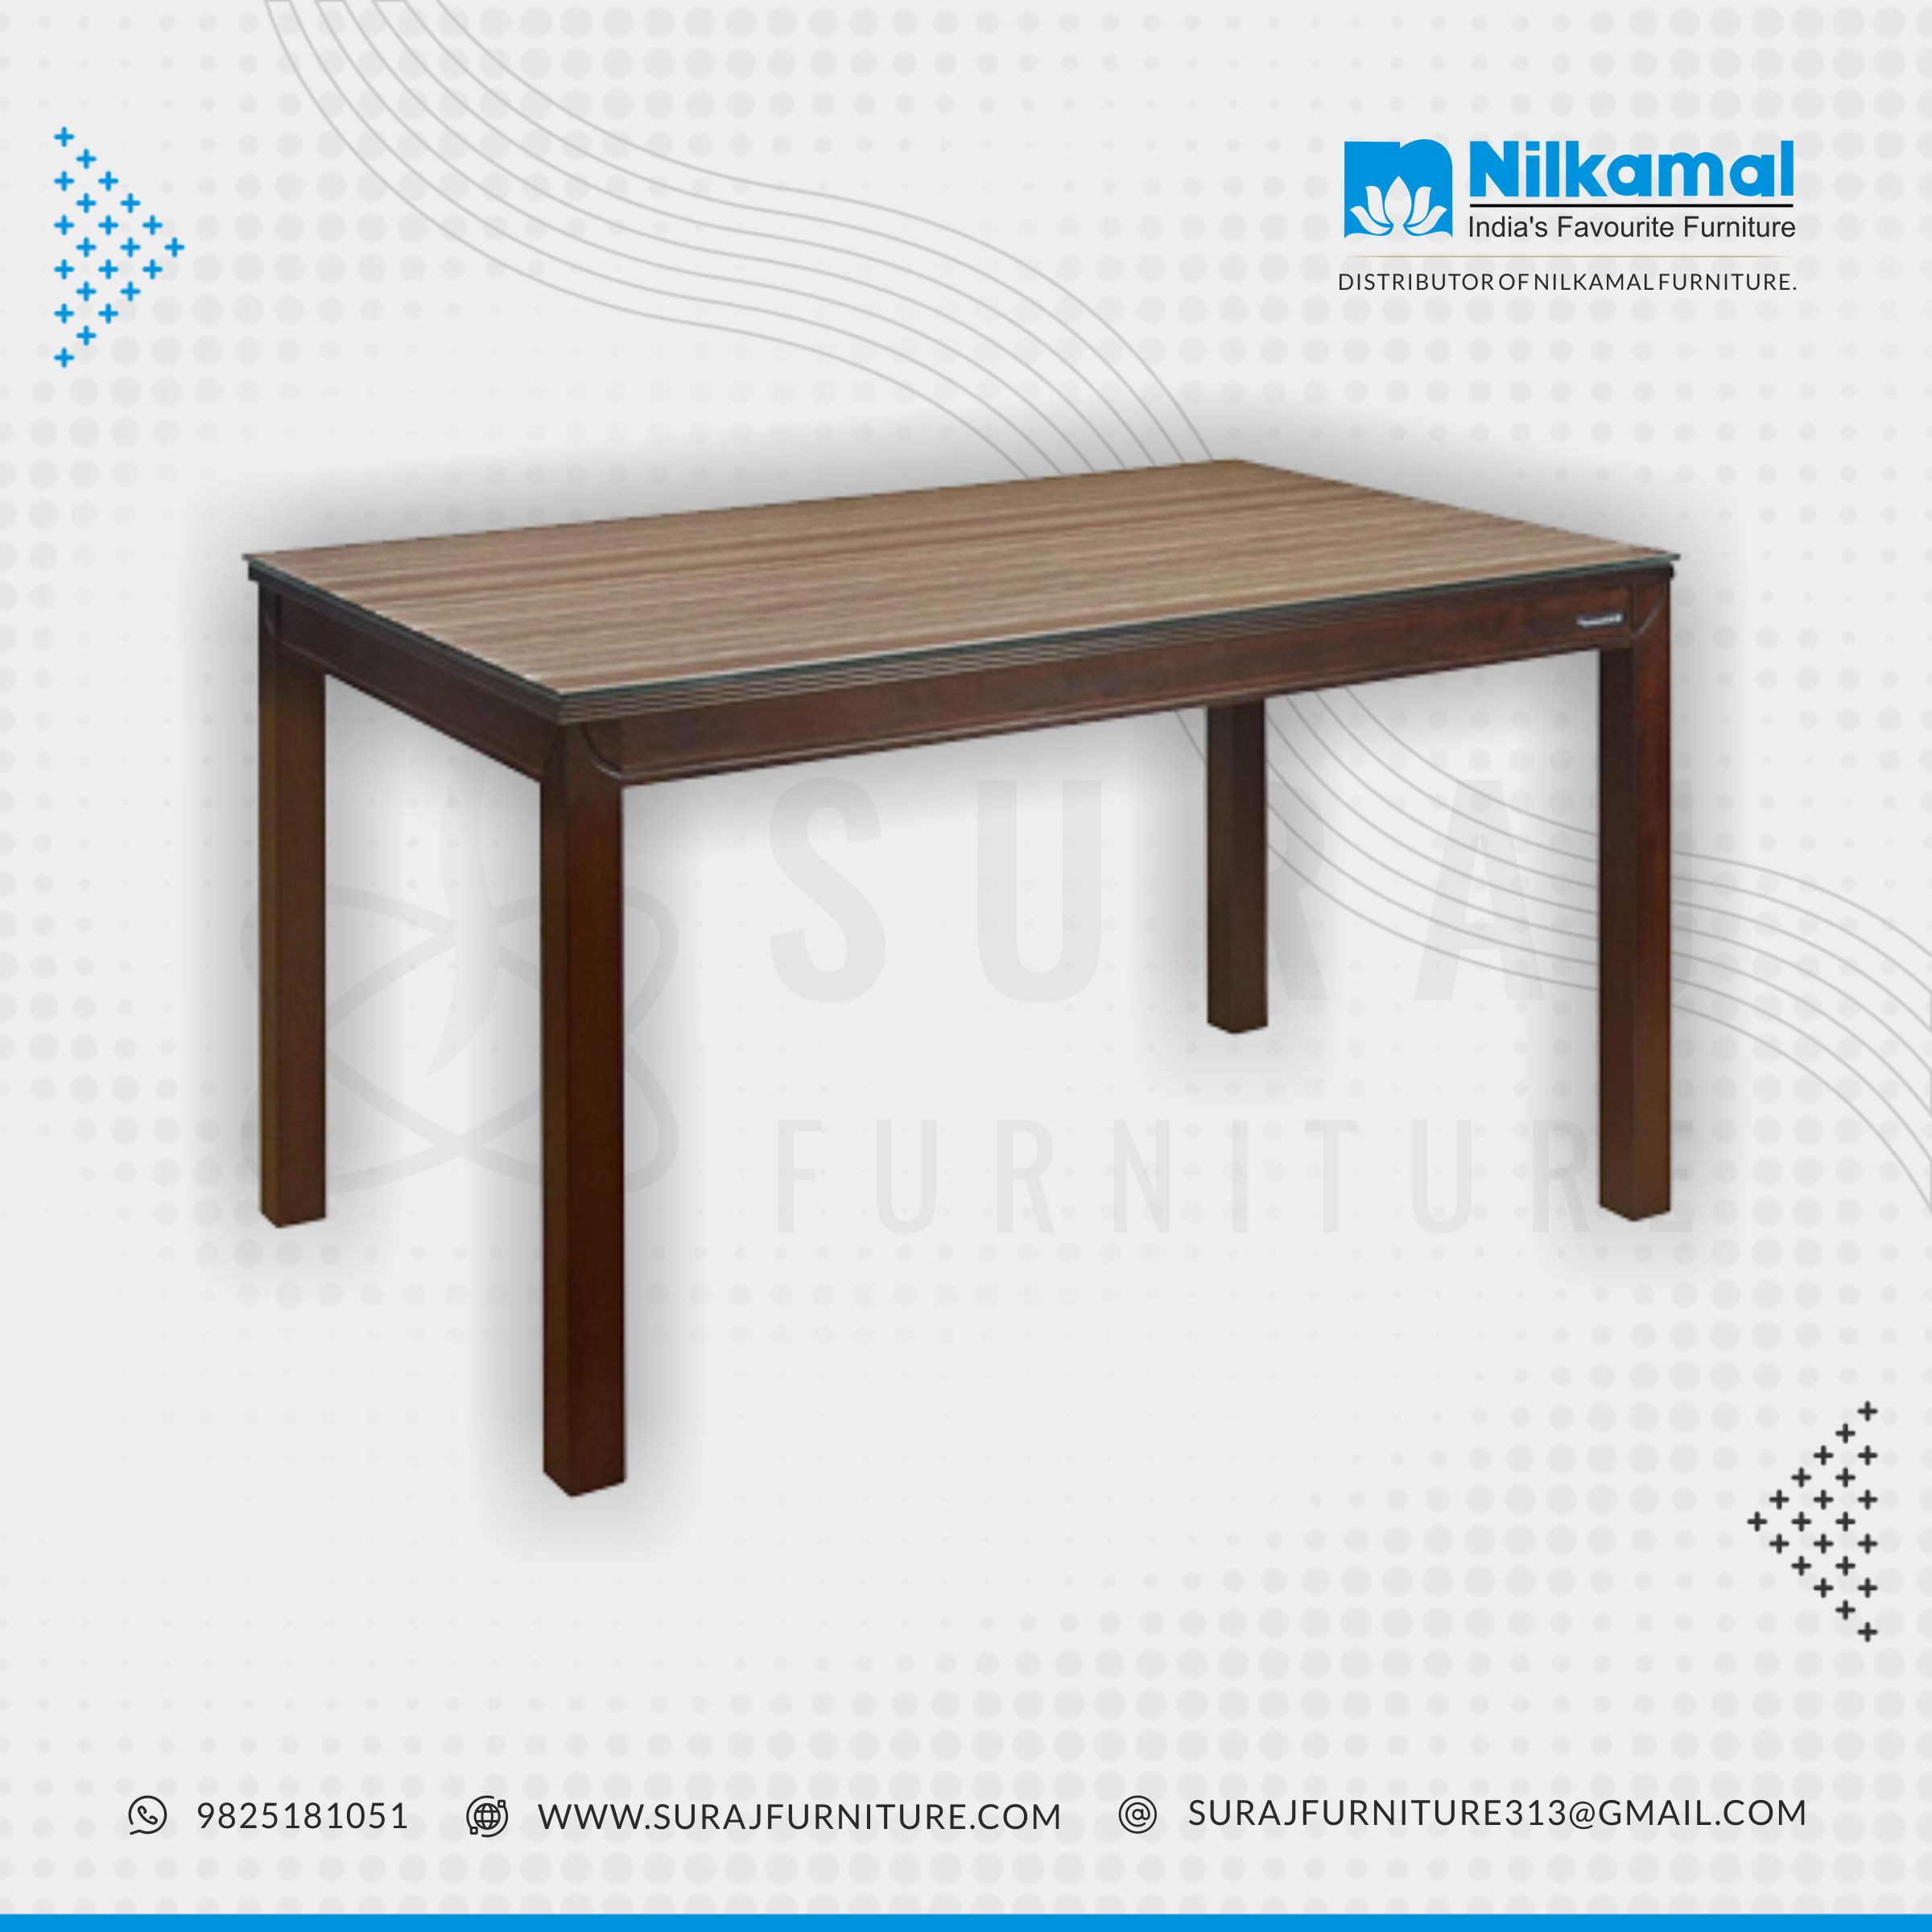 Nilkamal Quentin 4 Seater Dining Table